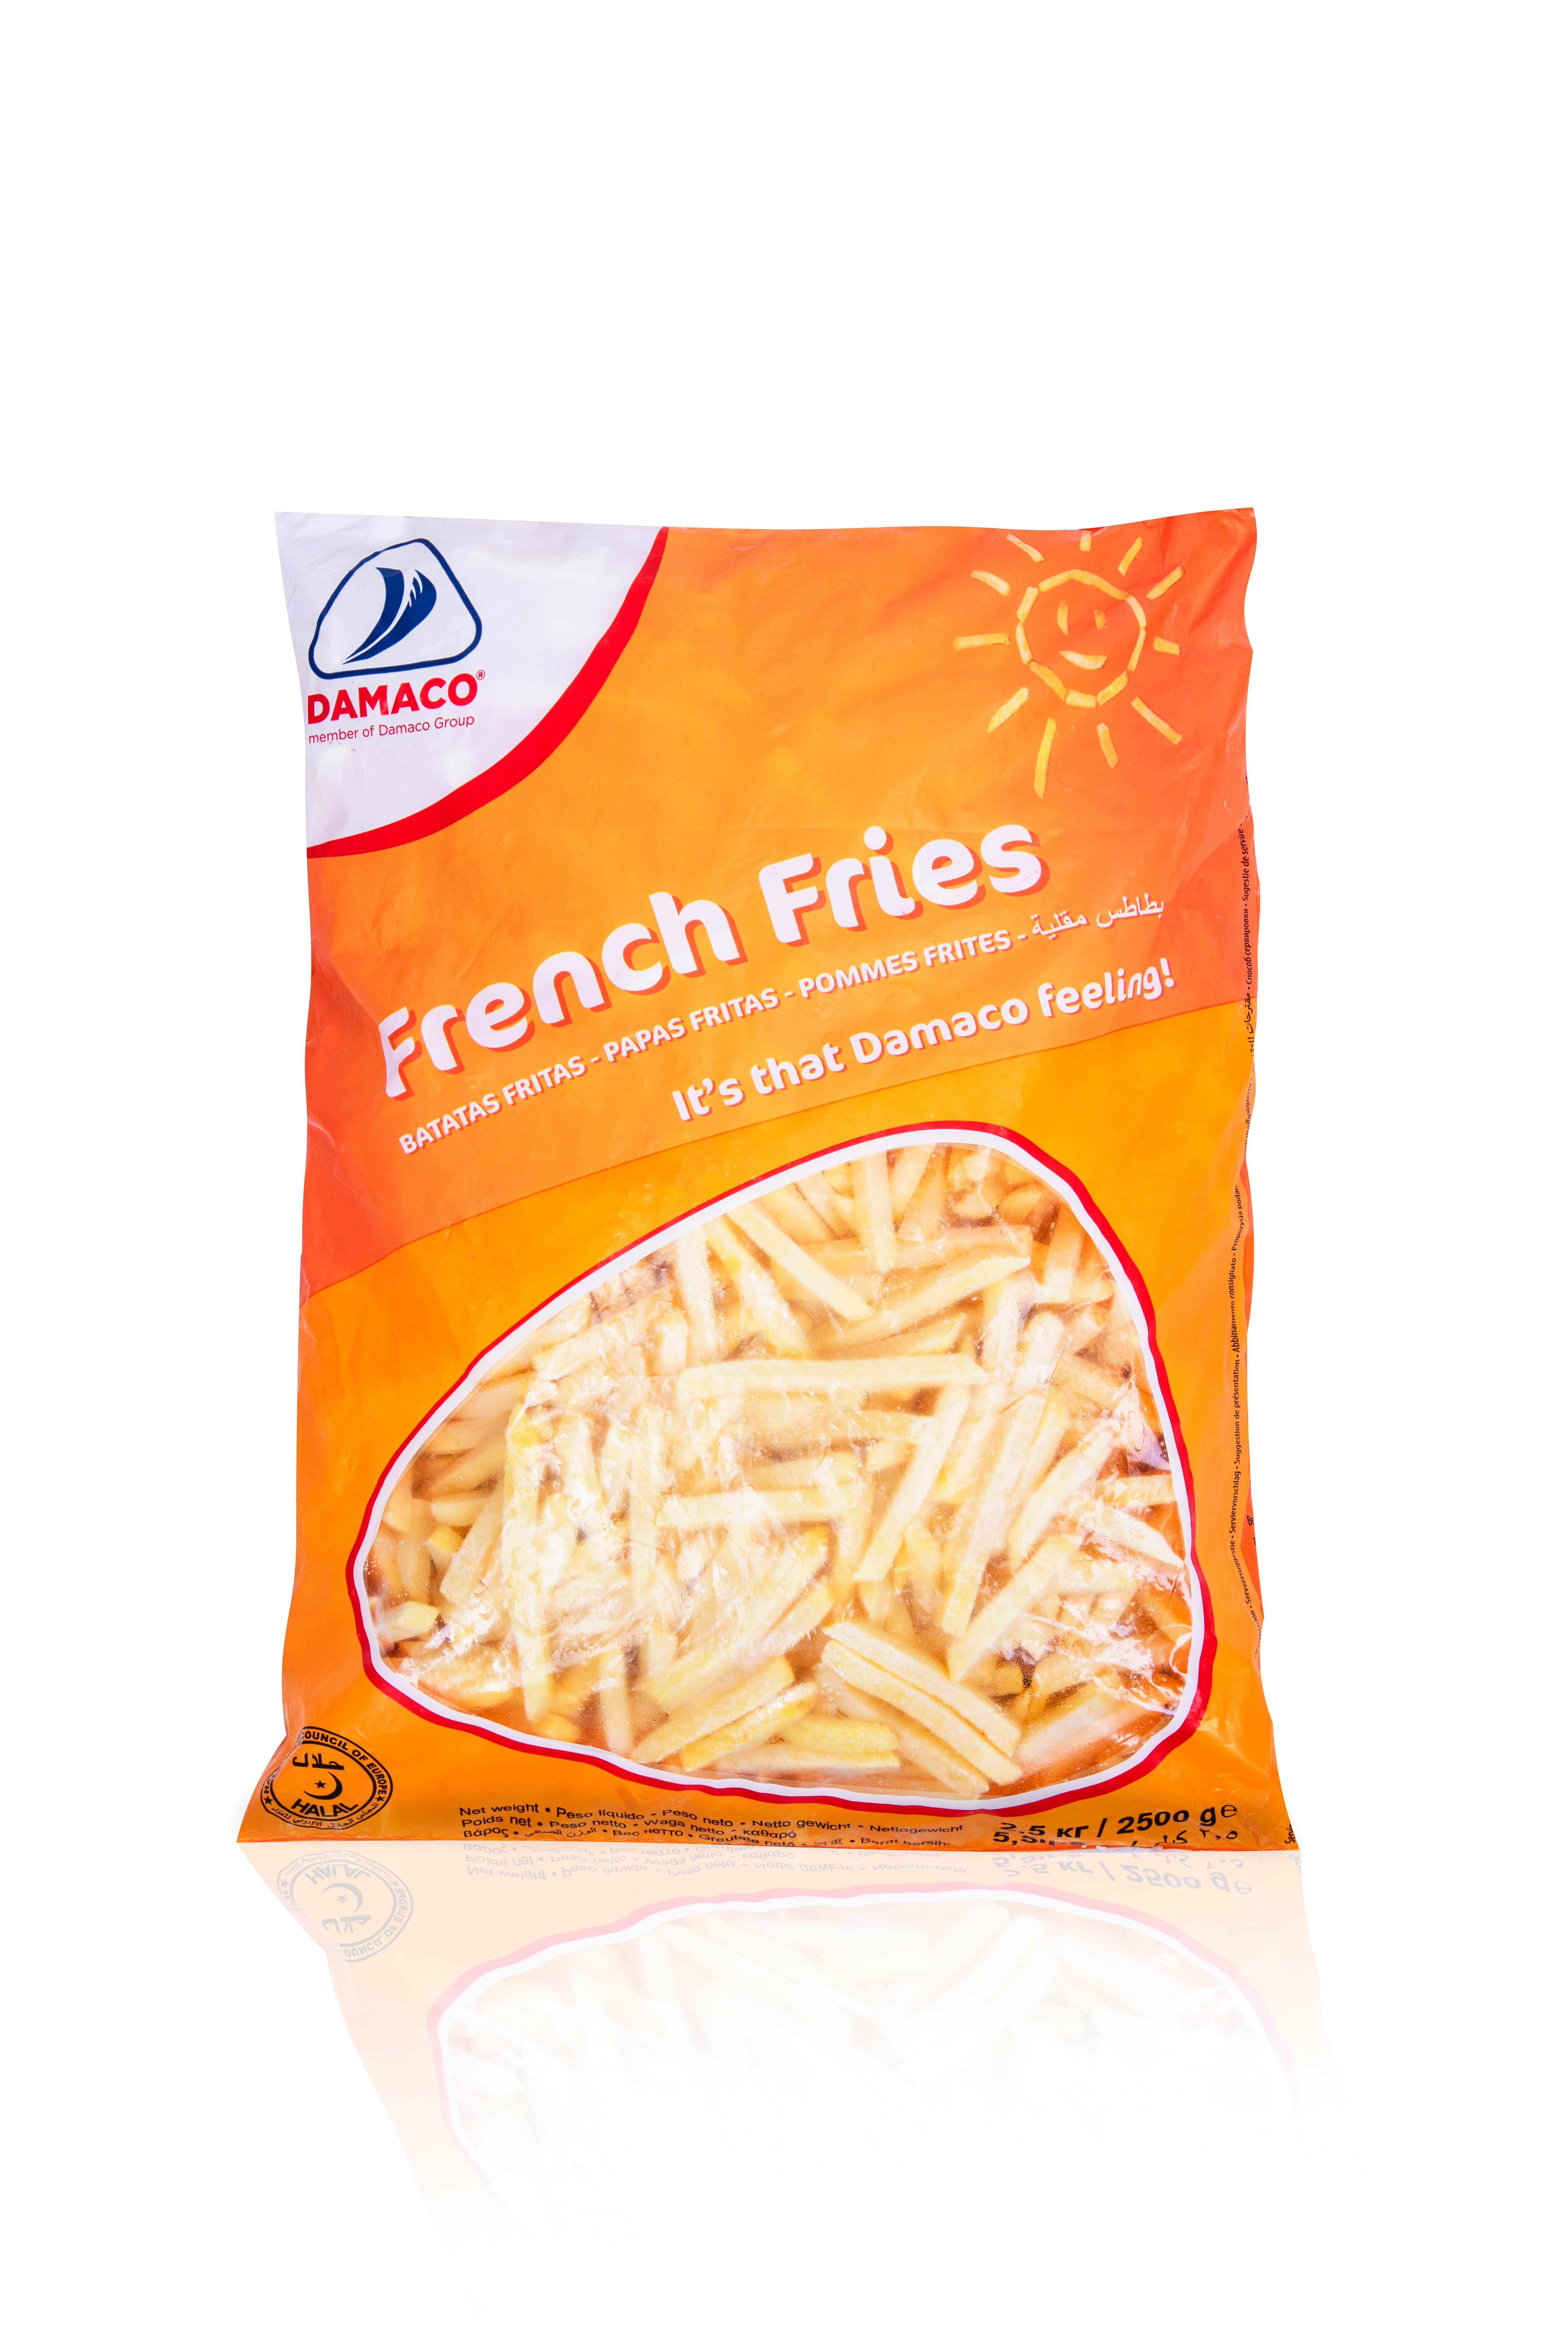 French fries 7x7mm packaging Damaco brand